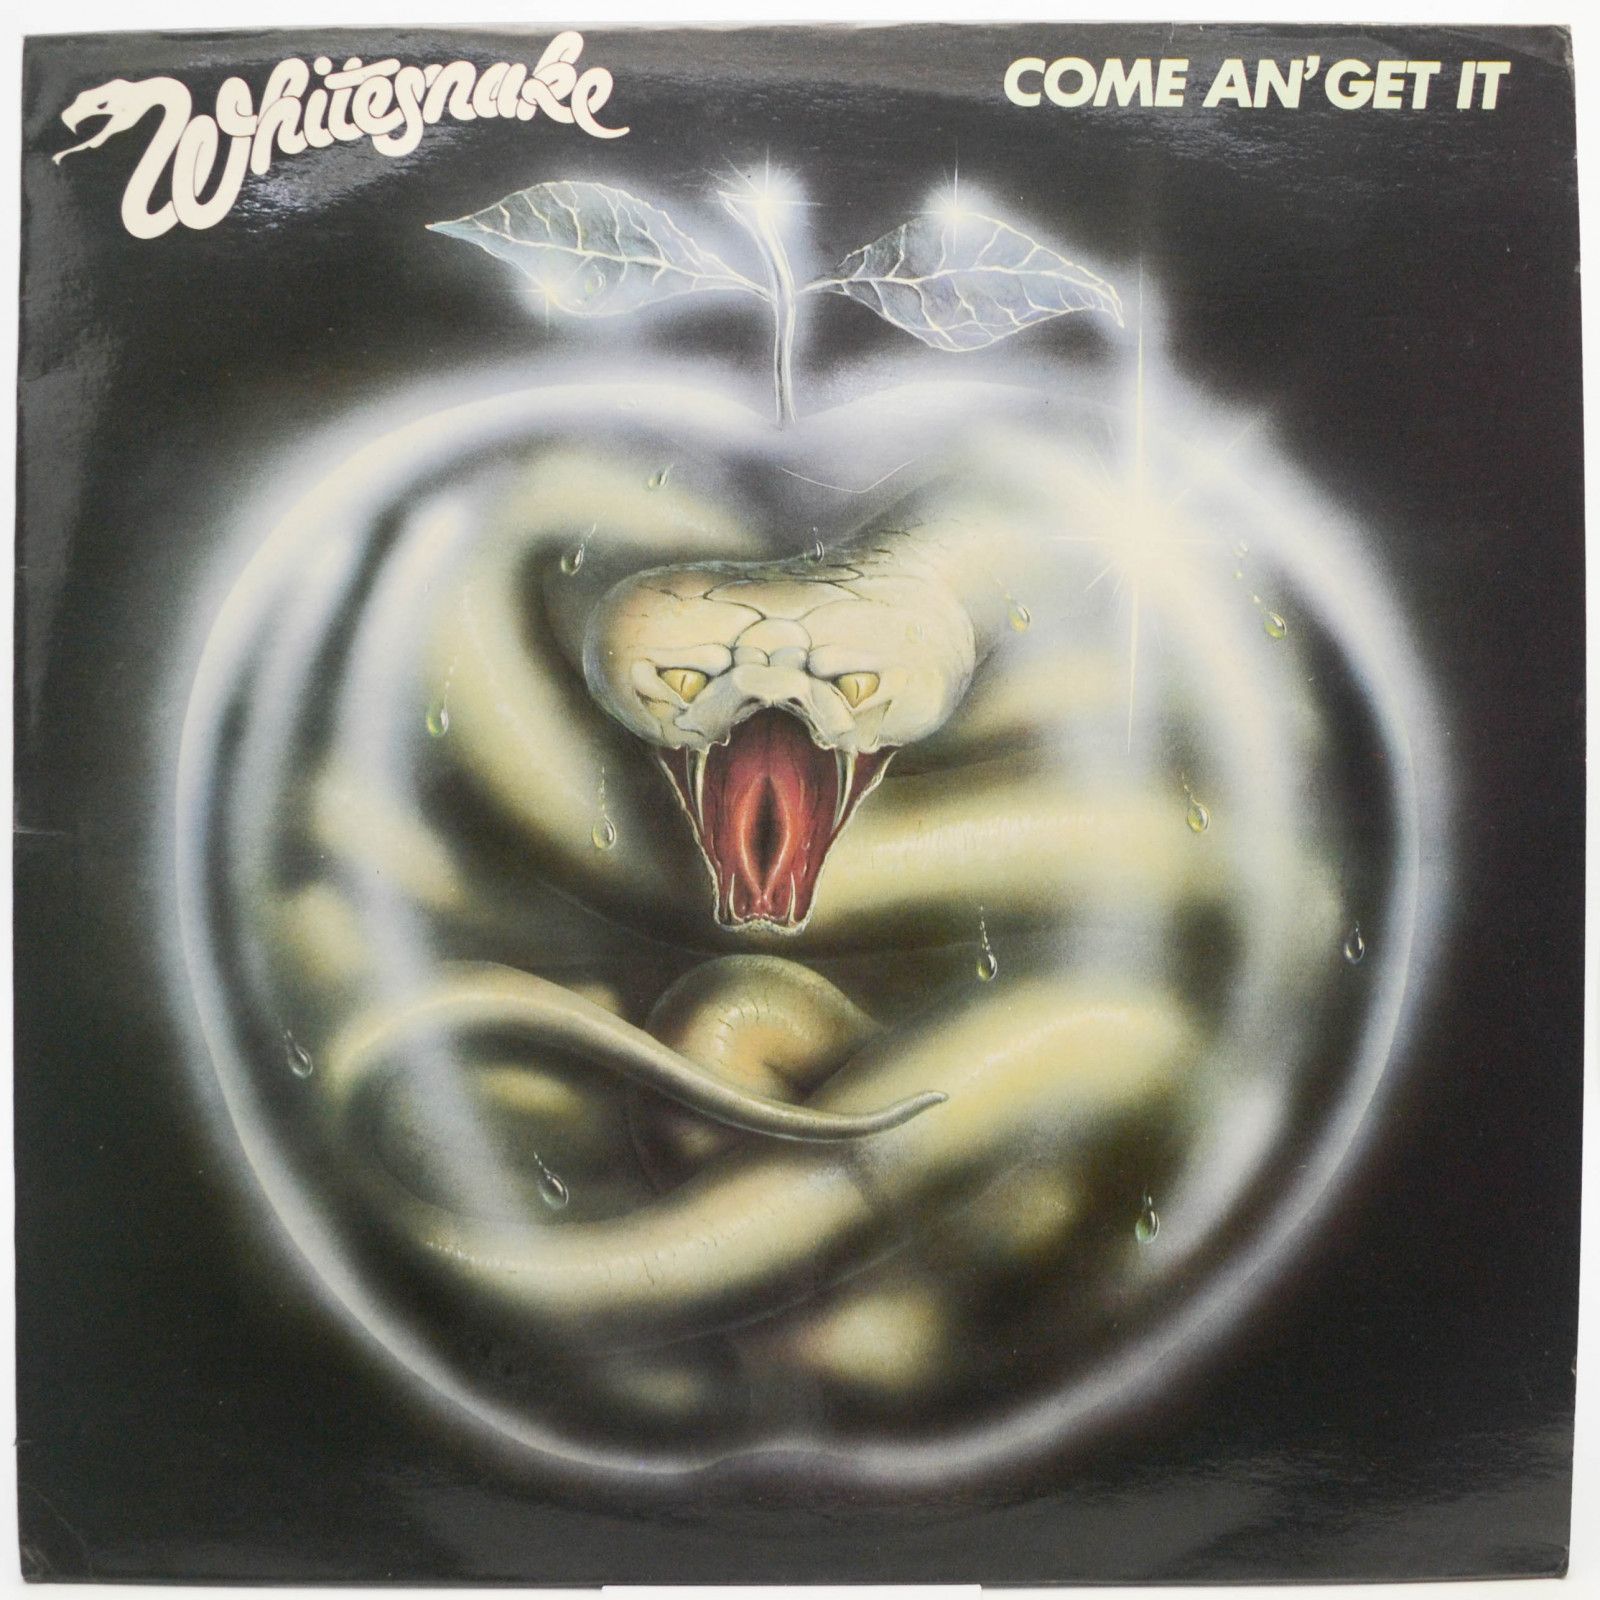 Whitesnake — Come An' Get It, 1981